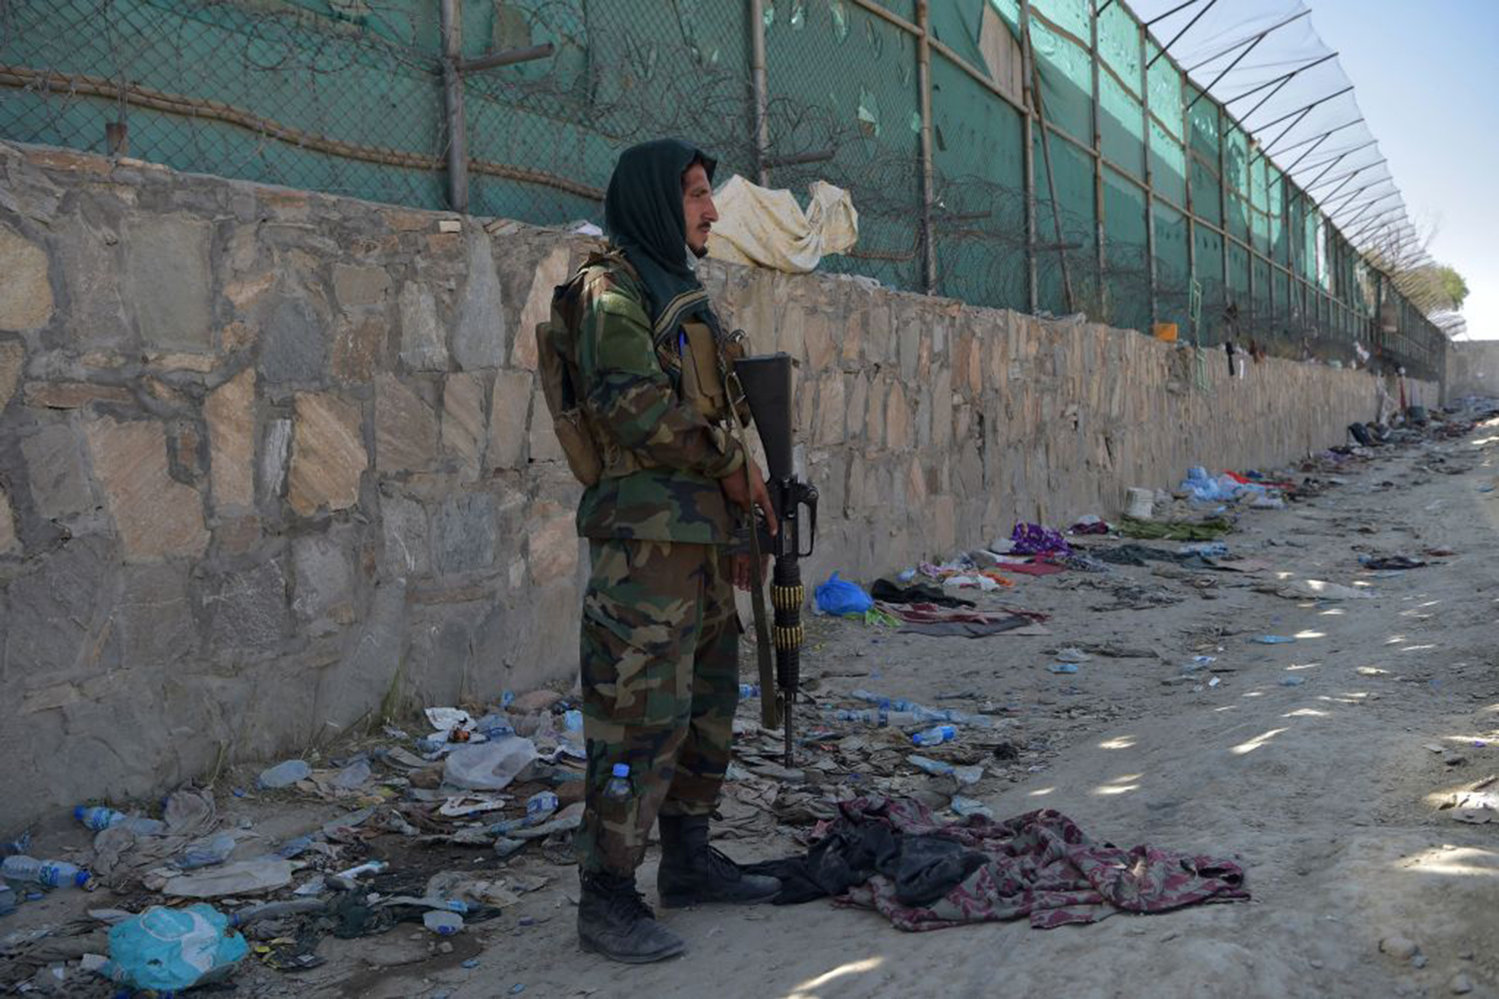 A Taliban fighter stands guard at the site of the August 26 twin suicide bombs, which killed scores of people including 13 US troops, at Kabul airport on August 27, 2021. (Wakil Kohsar/AFP via Getty Images/TNS)